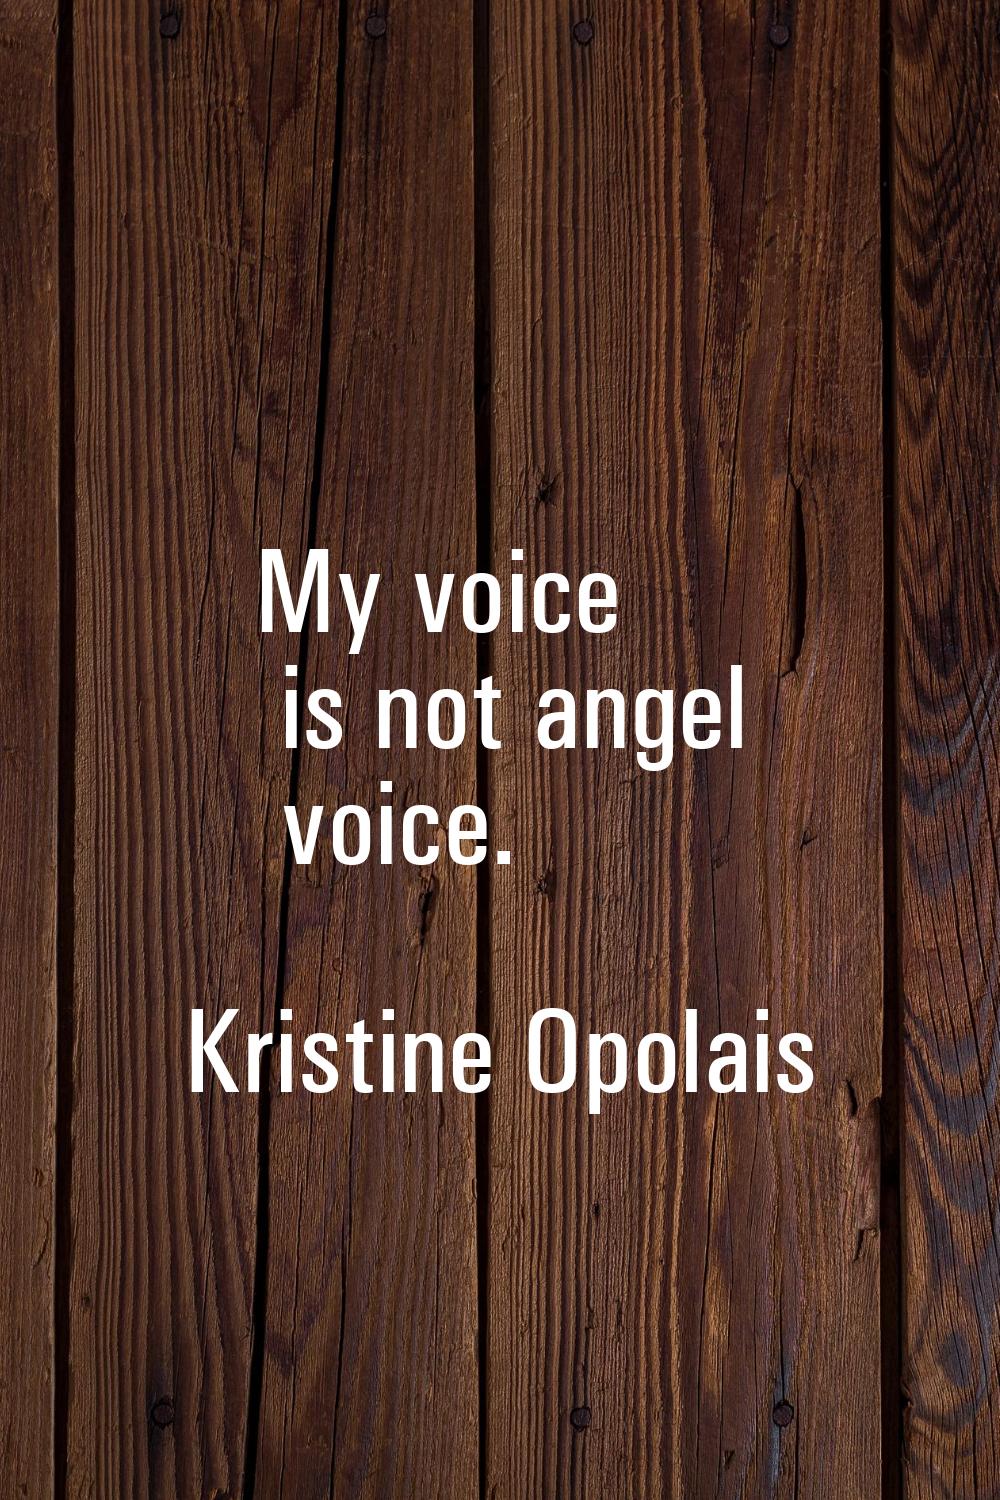 My voice is not angel voice.